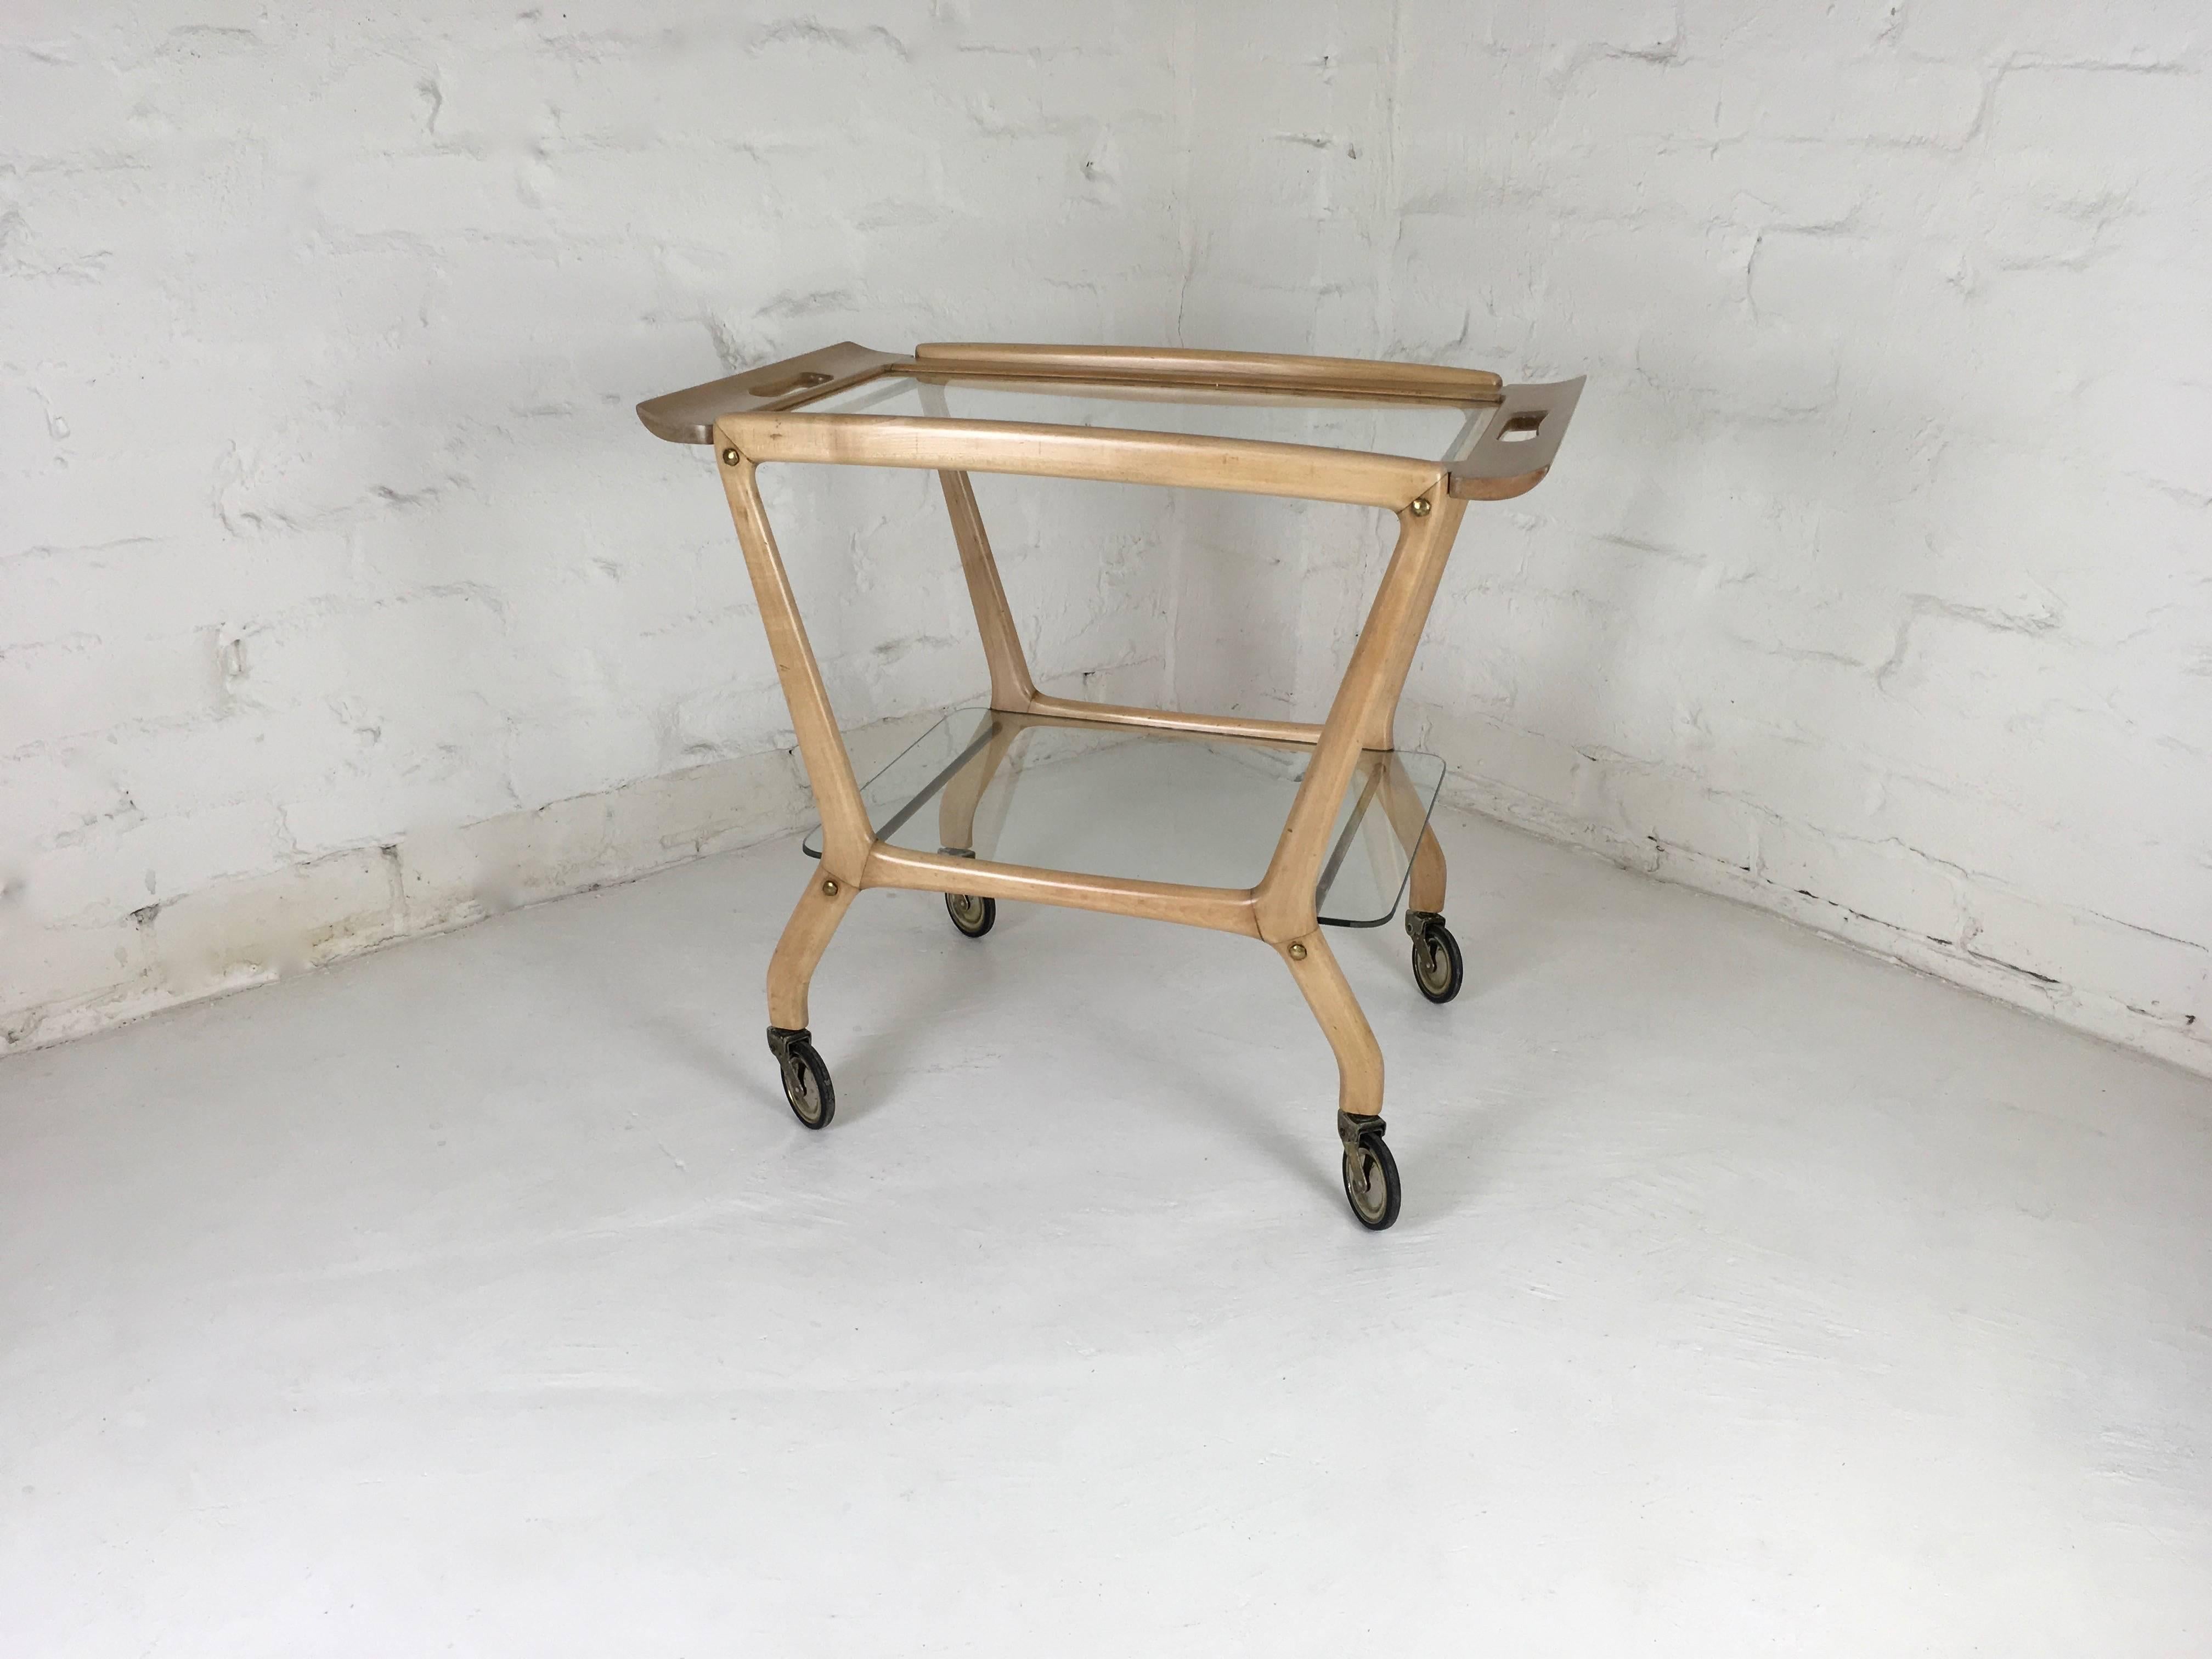 Roll on 6 o'clock! This lovely bar cart will make your cocktail time a delight. Beautifully designed, elegant, yet sturdy. The top tier of the cart has a removable serving tray with Asiatic style upturned ends - a lovely item in it's own right. The